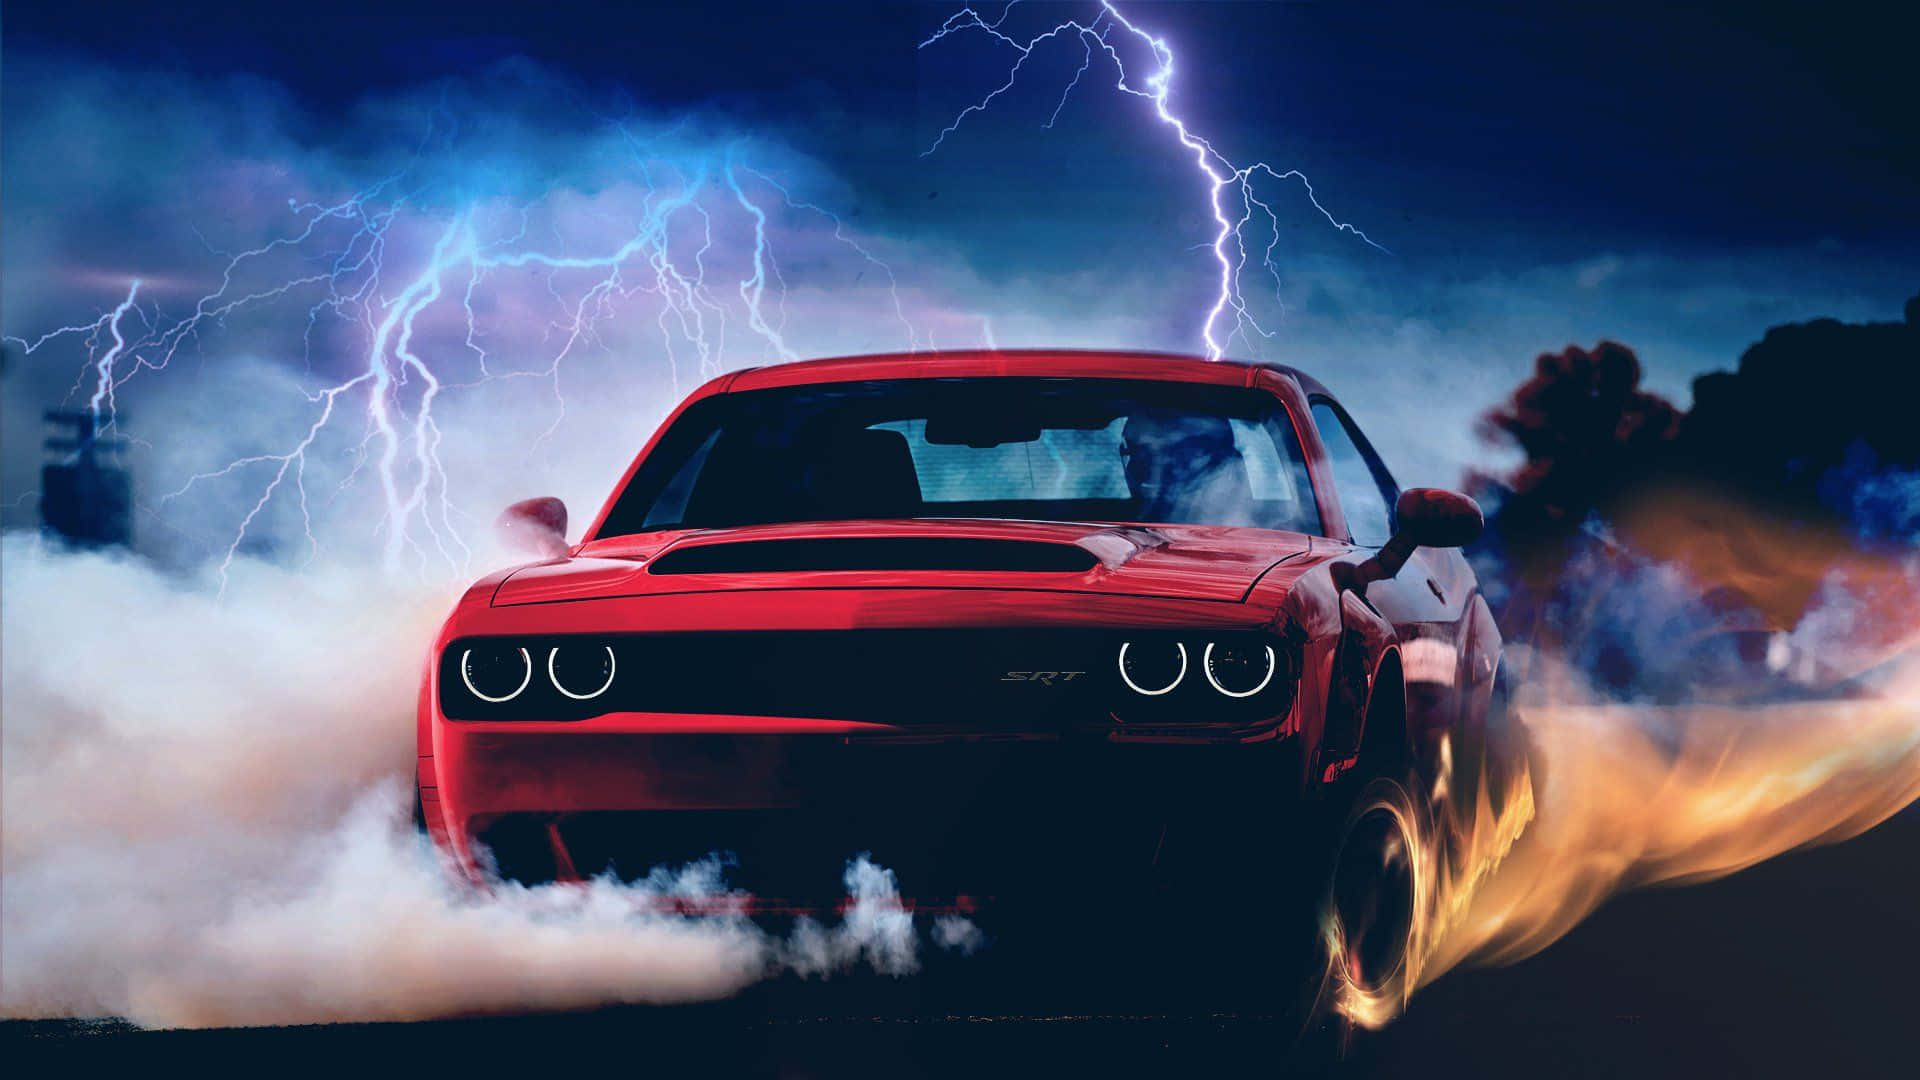 The Unstoppable Hellcat Background